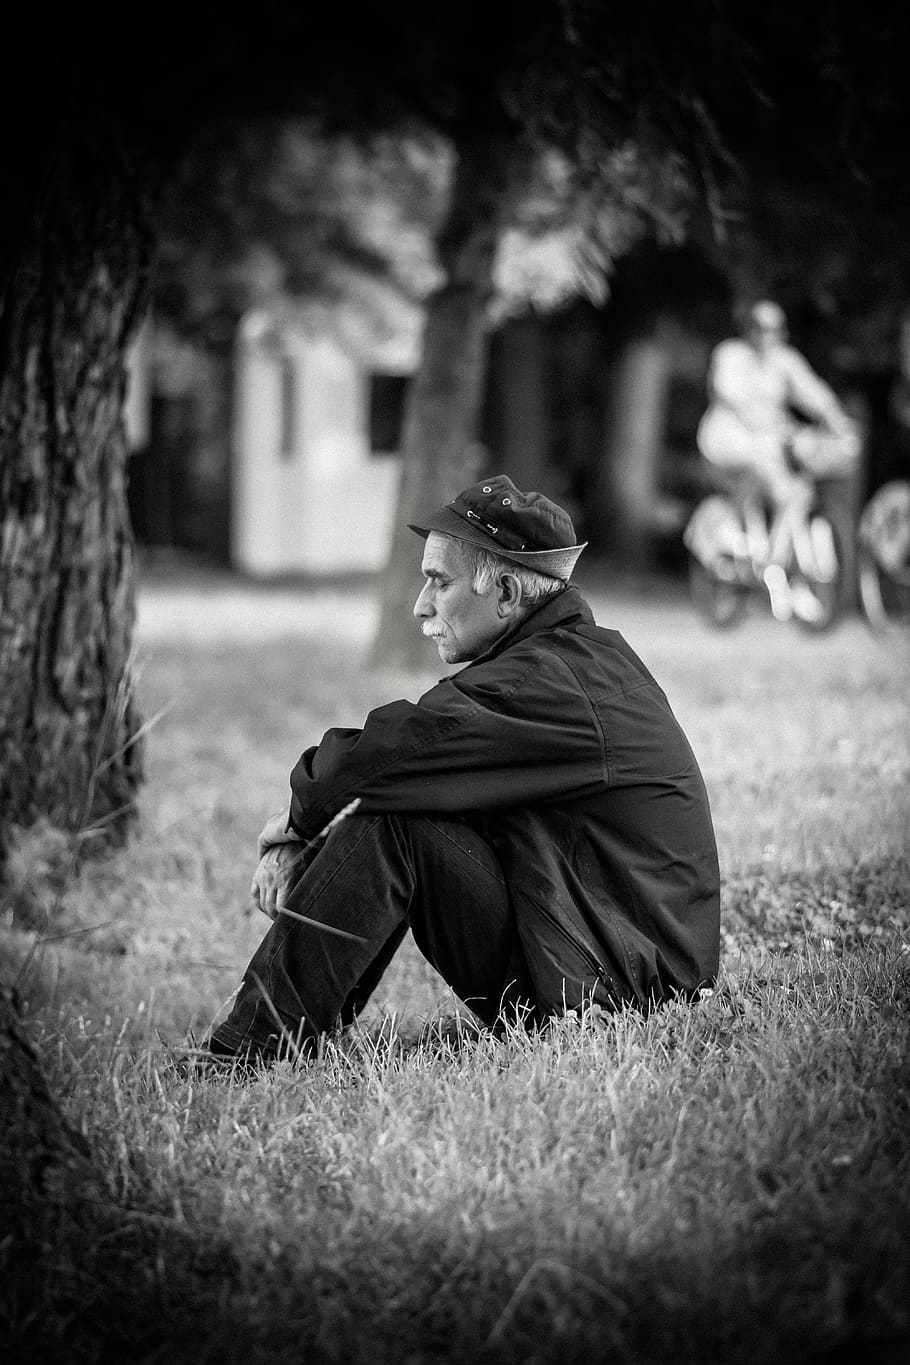 grass, people, old, man, sad, black and white, trees, playground, sitting, one person